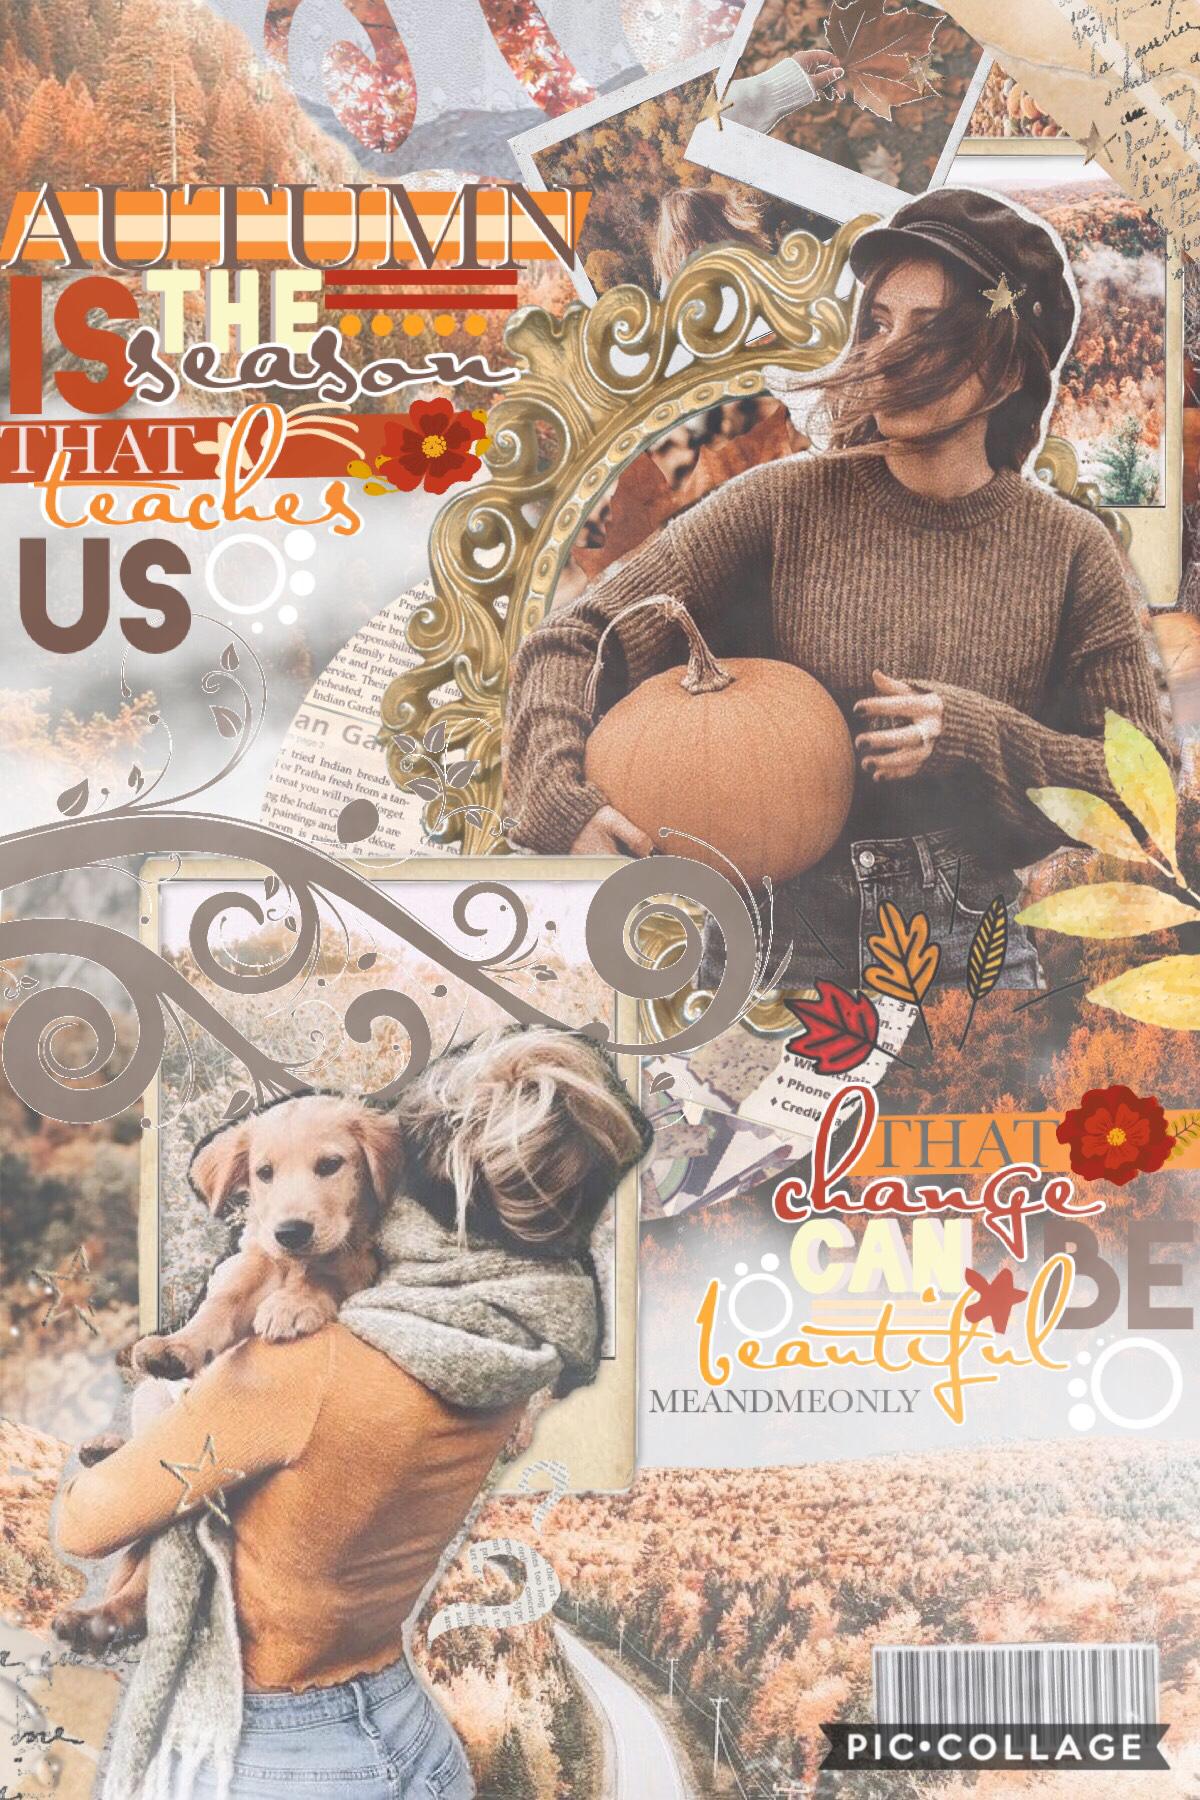 entry to @piccollage’s fall contest🍁🌾 sorry for the inactivity🍊ee spring is here🌸🌻 tell me about the most exciting part of your day? remember you are all such beautiful beings🤩👏